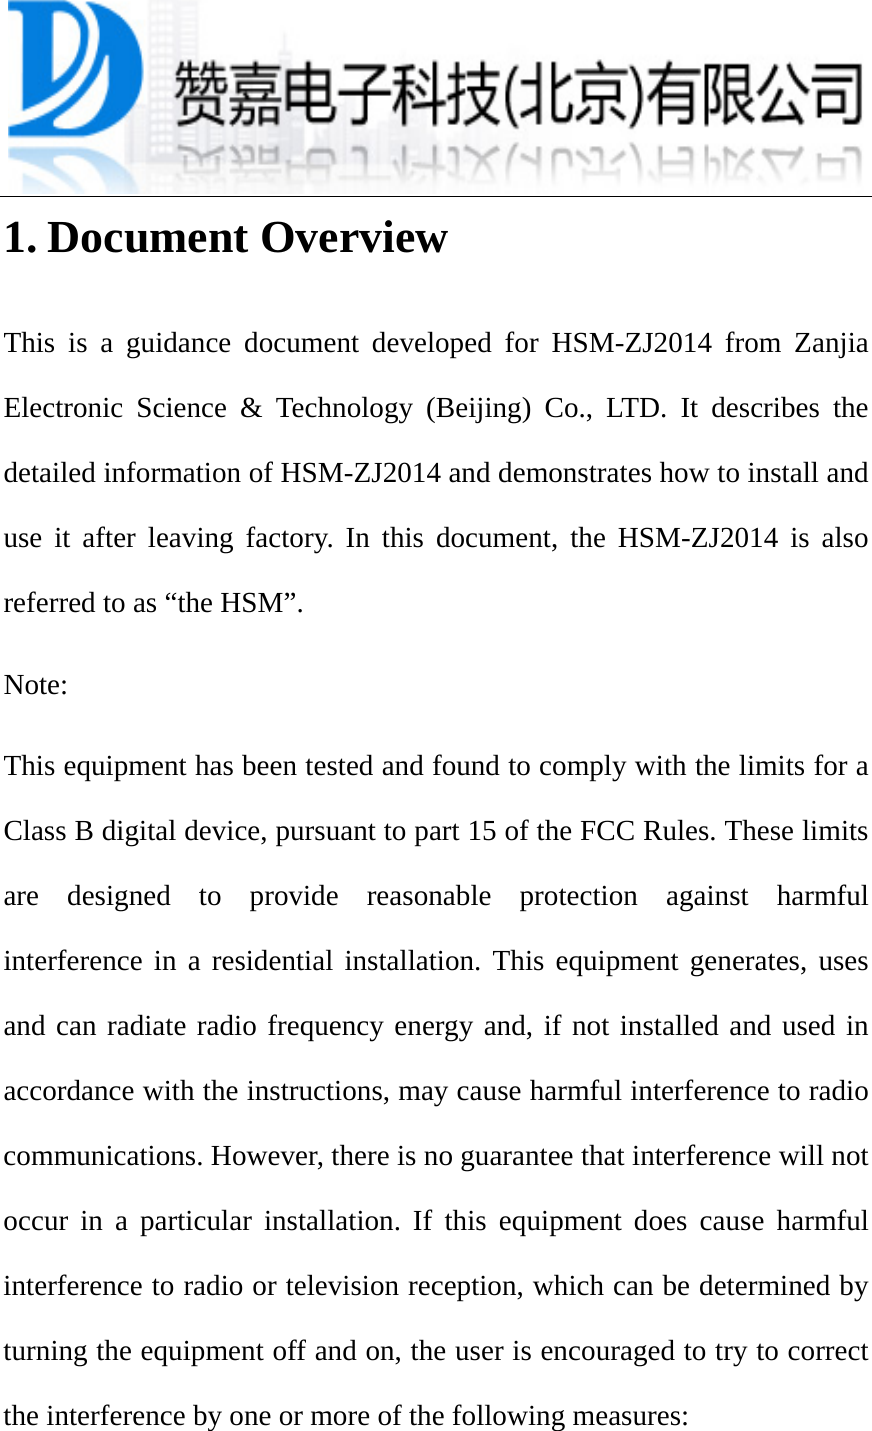 1. Document Overview This is a guidance document developed for HSM-ZJ2014 from Zanjia Electronic Science &amp; Technology (Beijing) Co., LTD. It describes the detailed information of HSM-ZJ2014 and demonstrates how to install and use it after leaving factory. In this document, the HSM-ZJ2014 is also referred to as “the HSM”. Note: This equipment has been tested and found to comply with the limits for a Class B digital device, pursuant to part 15 of the FCC Rules. These limits are designed to provide reasonable protection against harmful interference in a residential installation. This equipment generates, uses and can radiate radio frequency energy and, if not installed and used in accordance with the instructions, may cause harmful interference to radio communications. However, there is no guarantee that interference will not occur in a particular installation. If this equipment does cause harmful interference to radio or television reception, which can be determined by turning the equipment off and on, the user is encouraged to try to correct the interference by one or more of the following measures: 